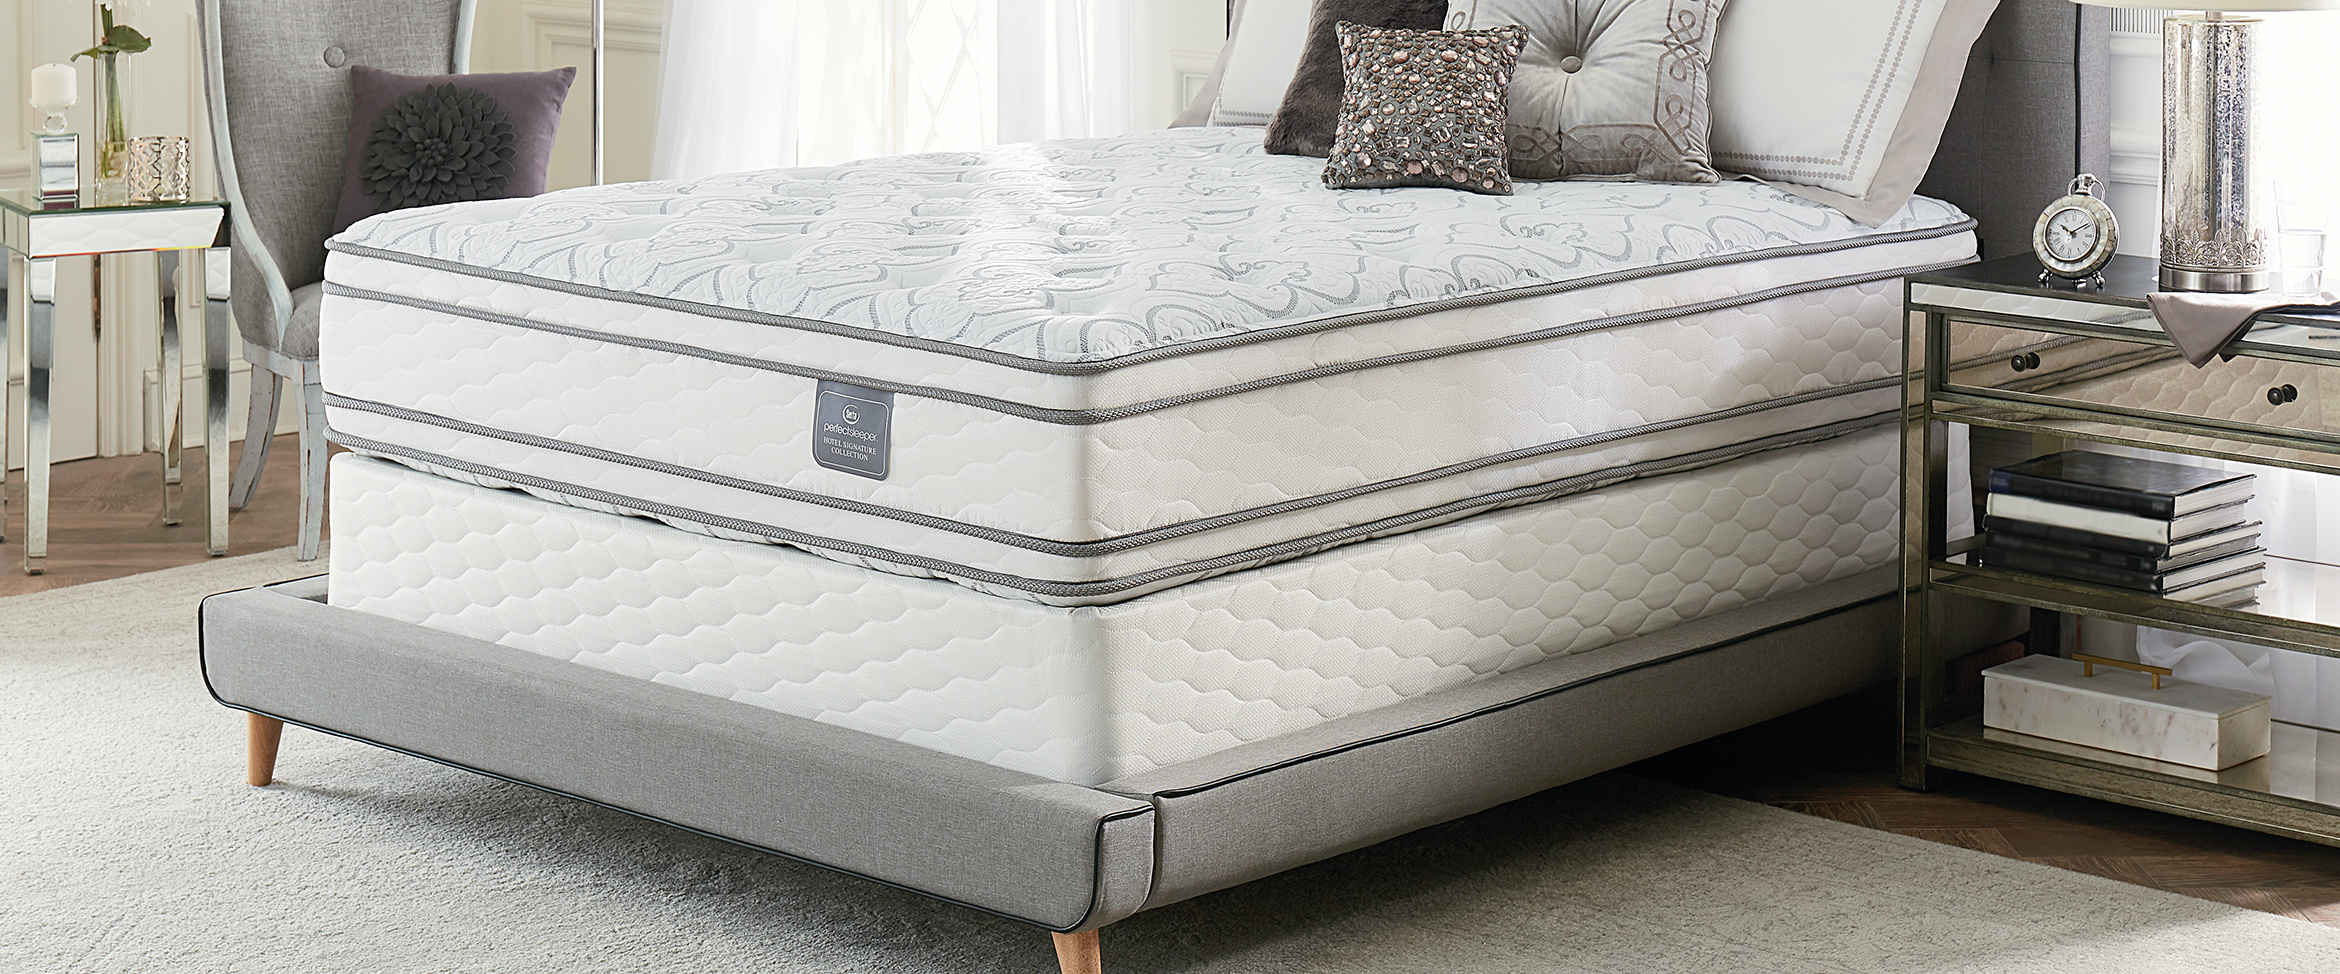 serta double sided mattress review